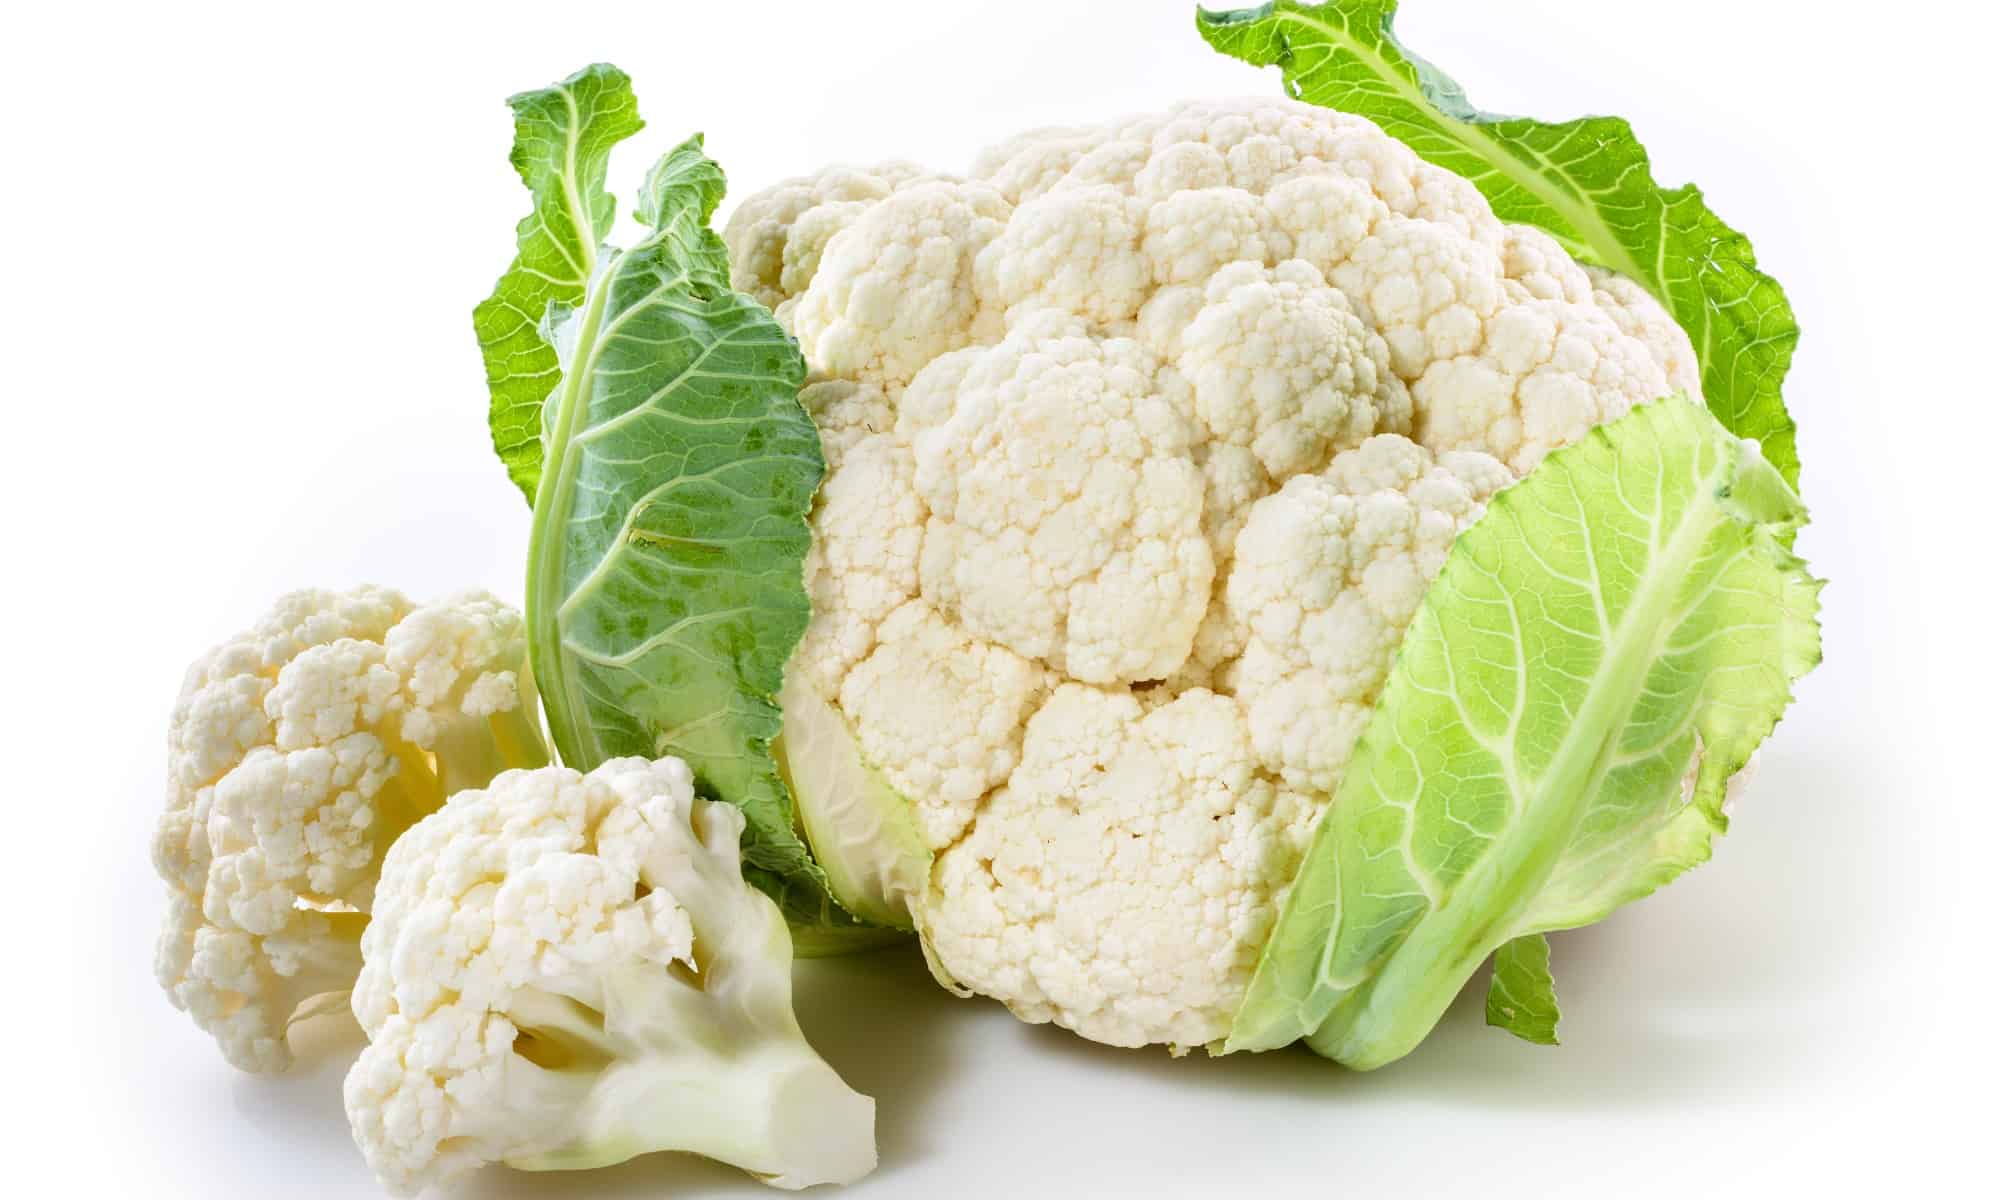 Cauliflower image - Agro trade for import & export [Mahdy Fresh - since 2000]